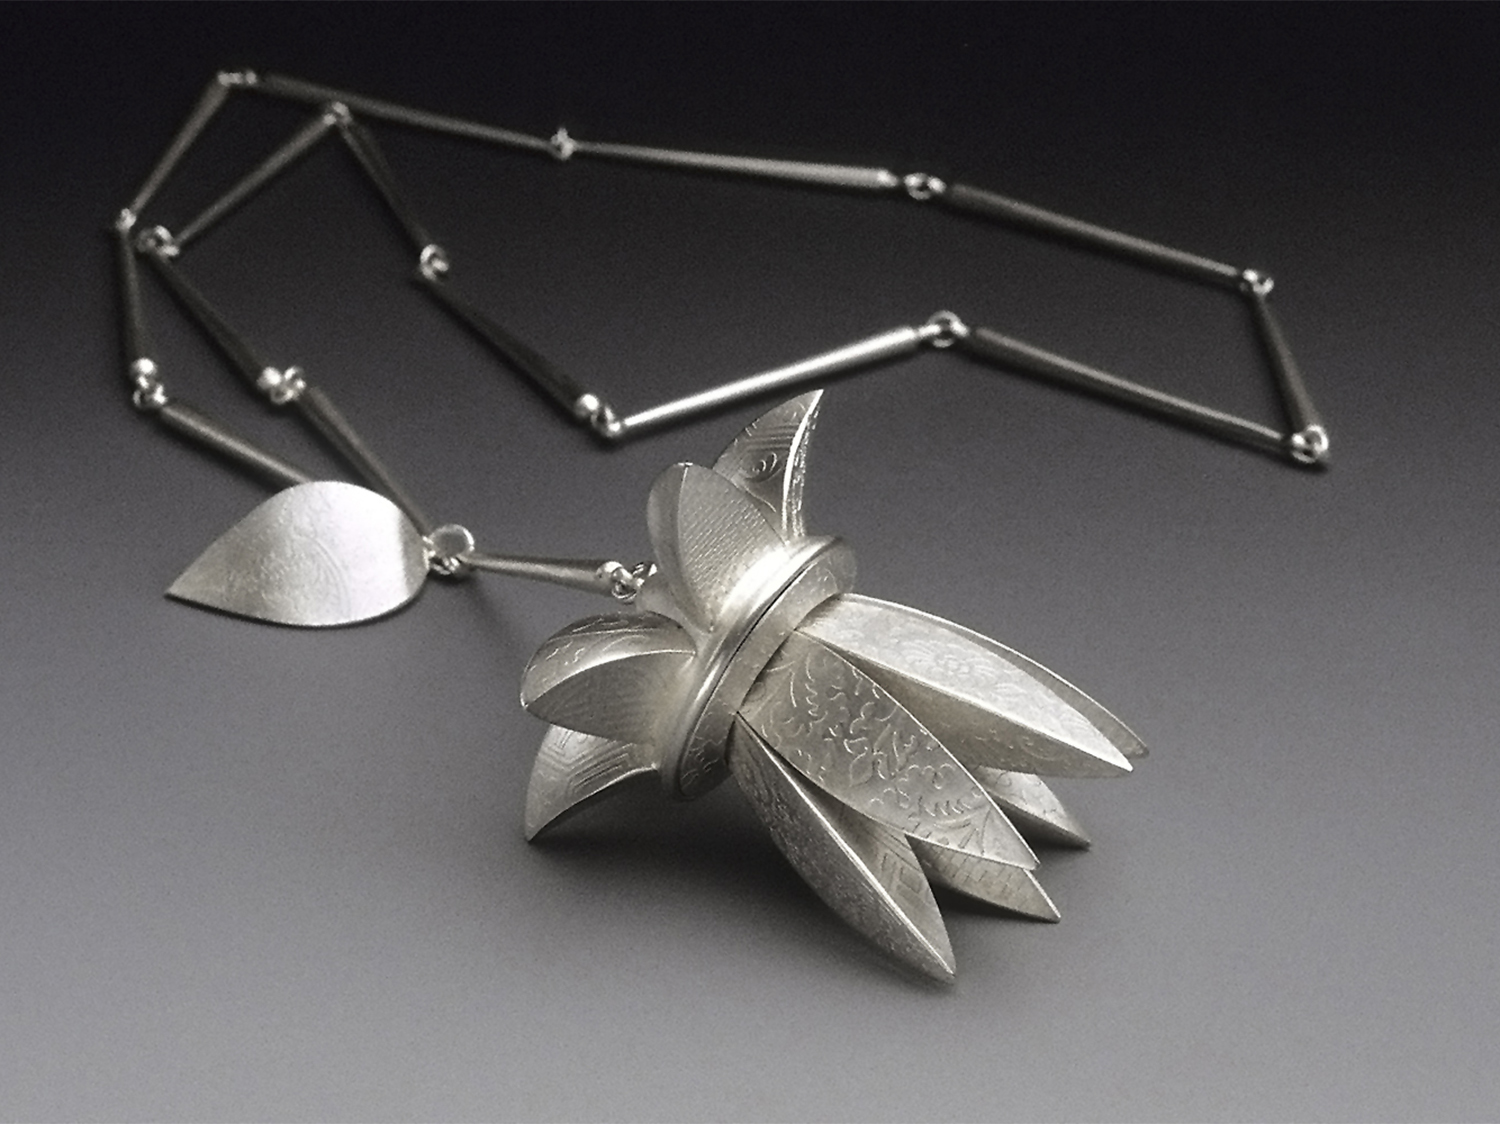 Flower Pendant  |  2000  |  sterling silver  |  3.125 x 2.675 x 2.675 inches